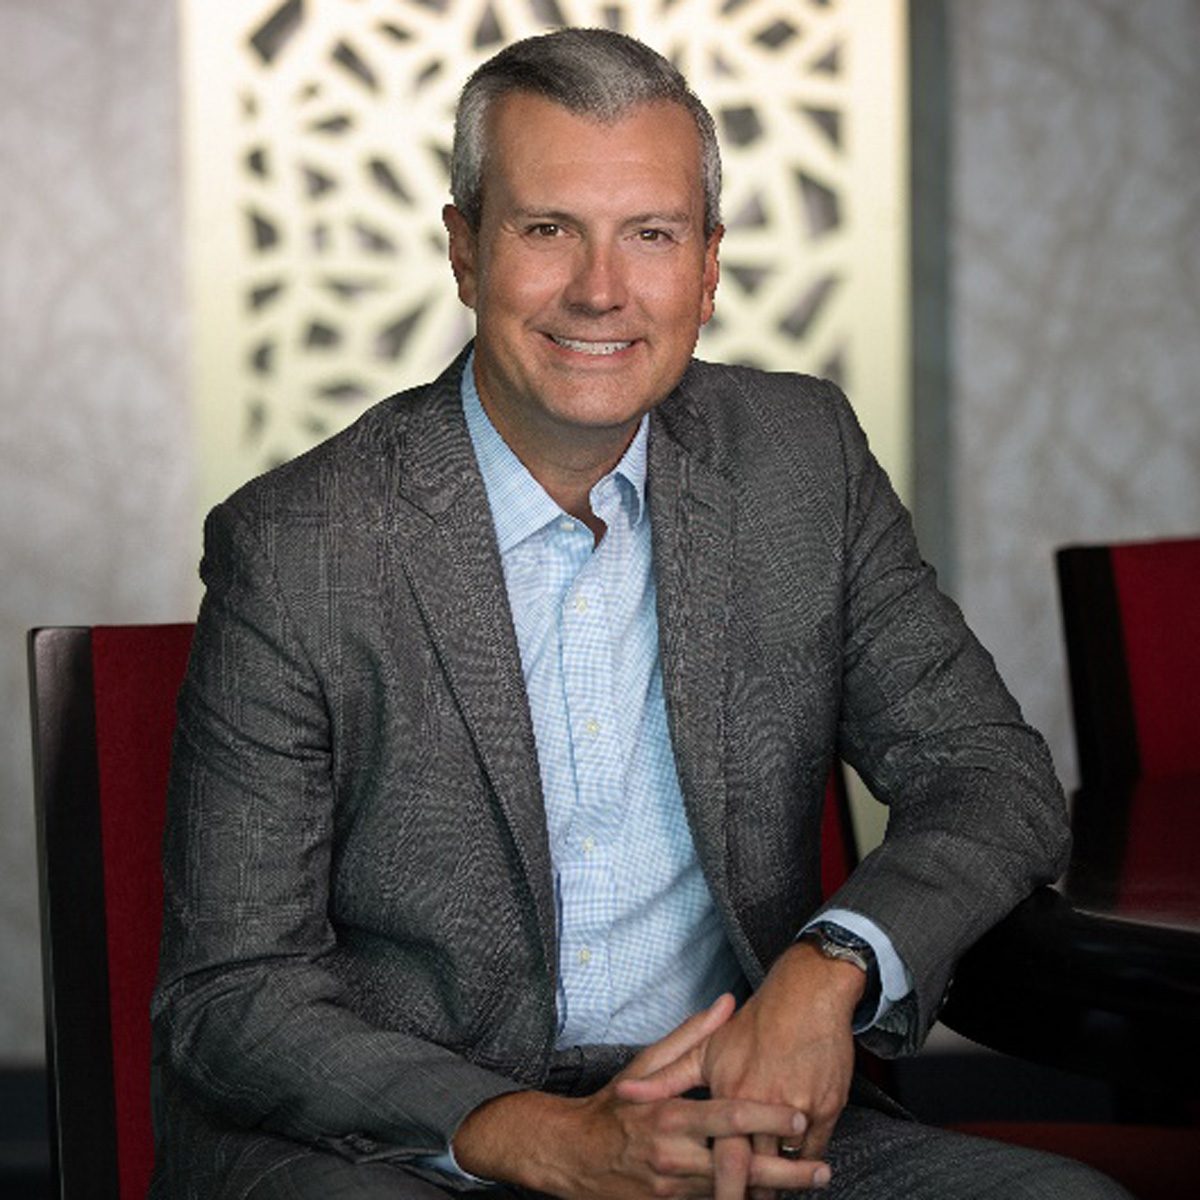 Foxwoods has appointed Blair Bendel as its new marketing senior vice president.